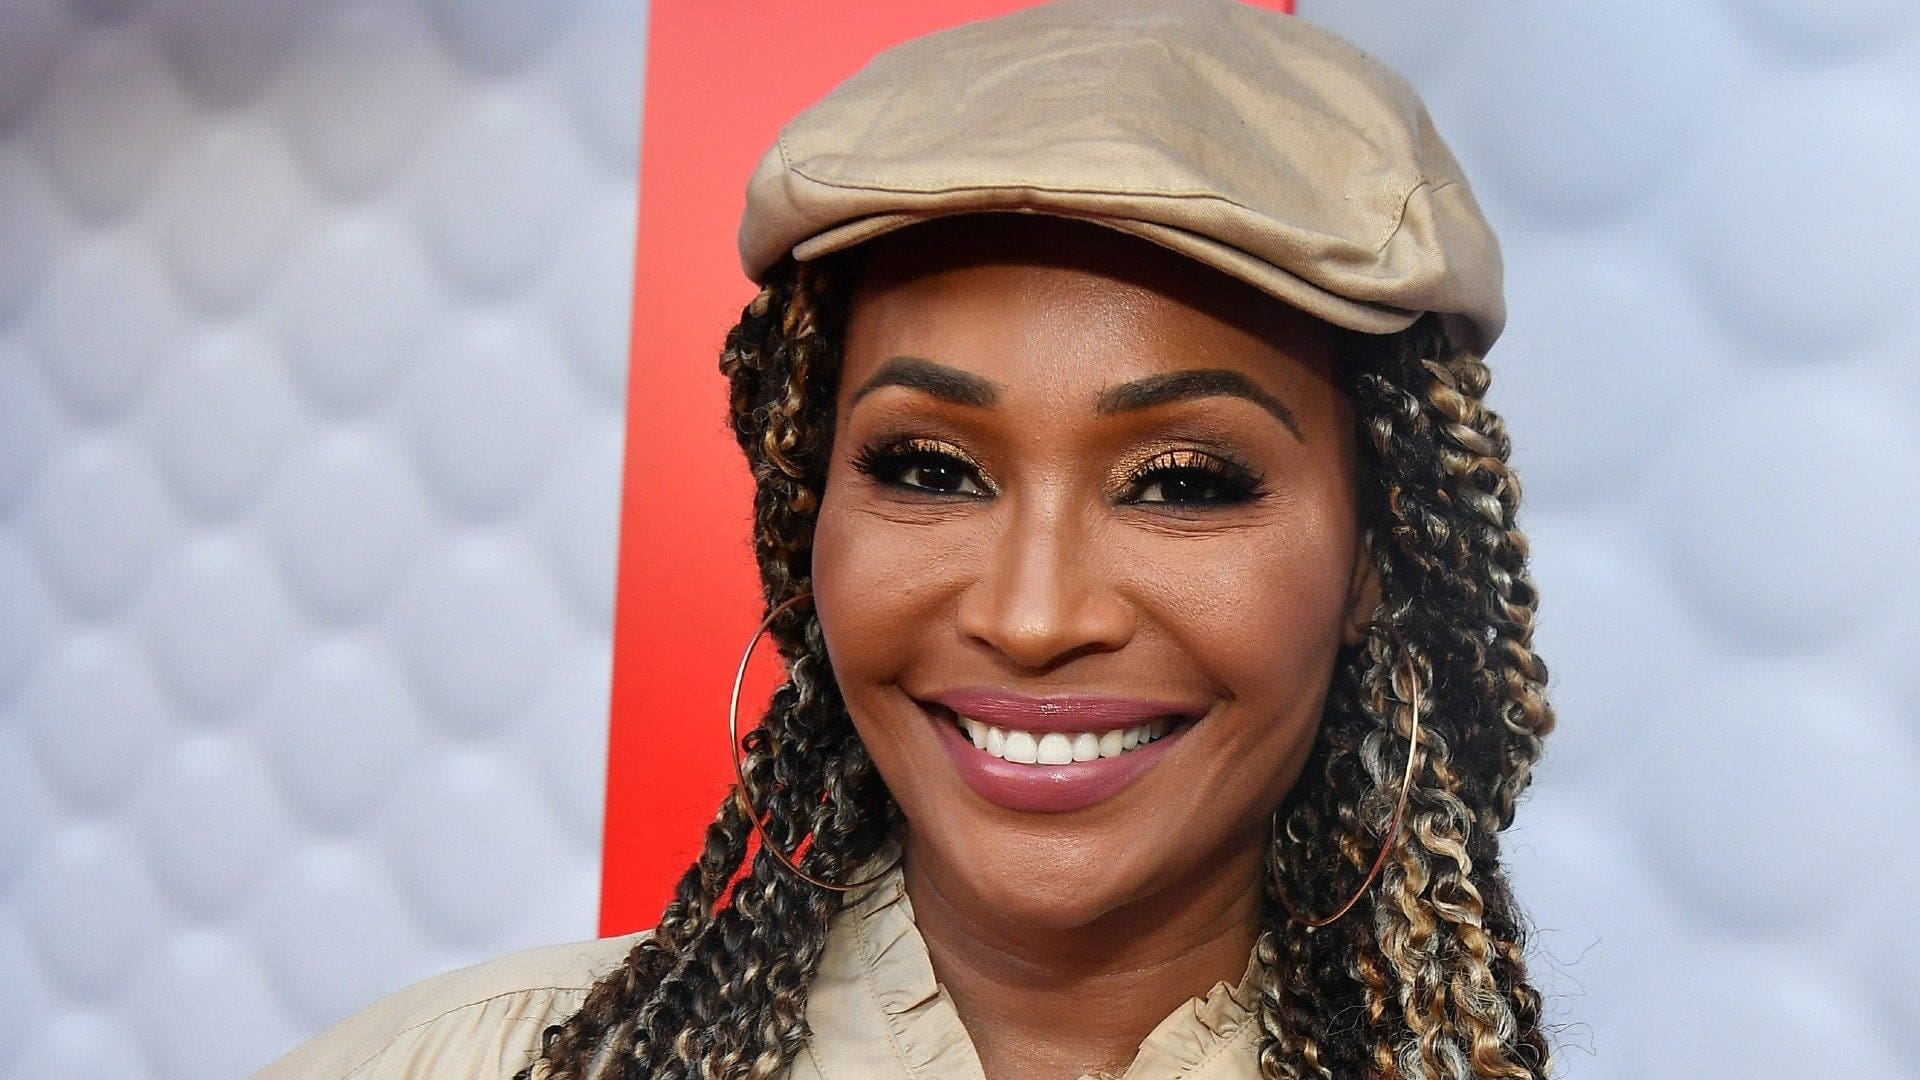 Cynthia Bailey Makes Fans' Day With This Photo Featuring Some Sweet Kids